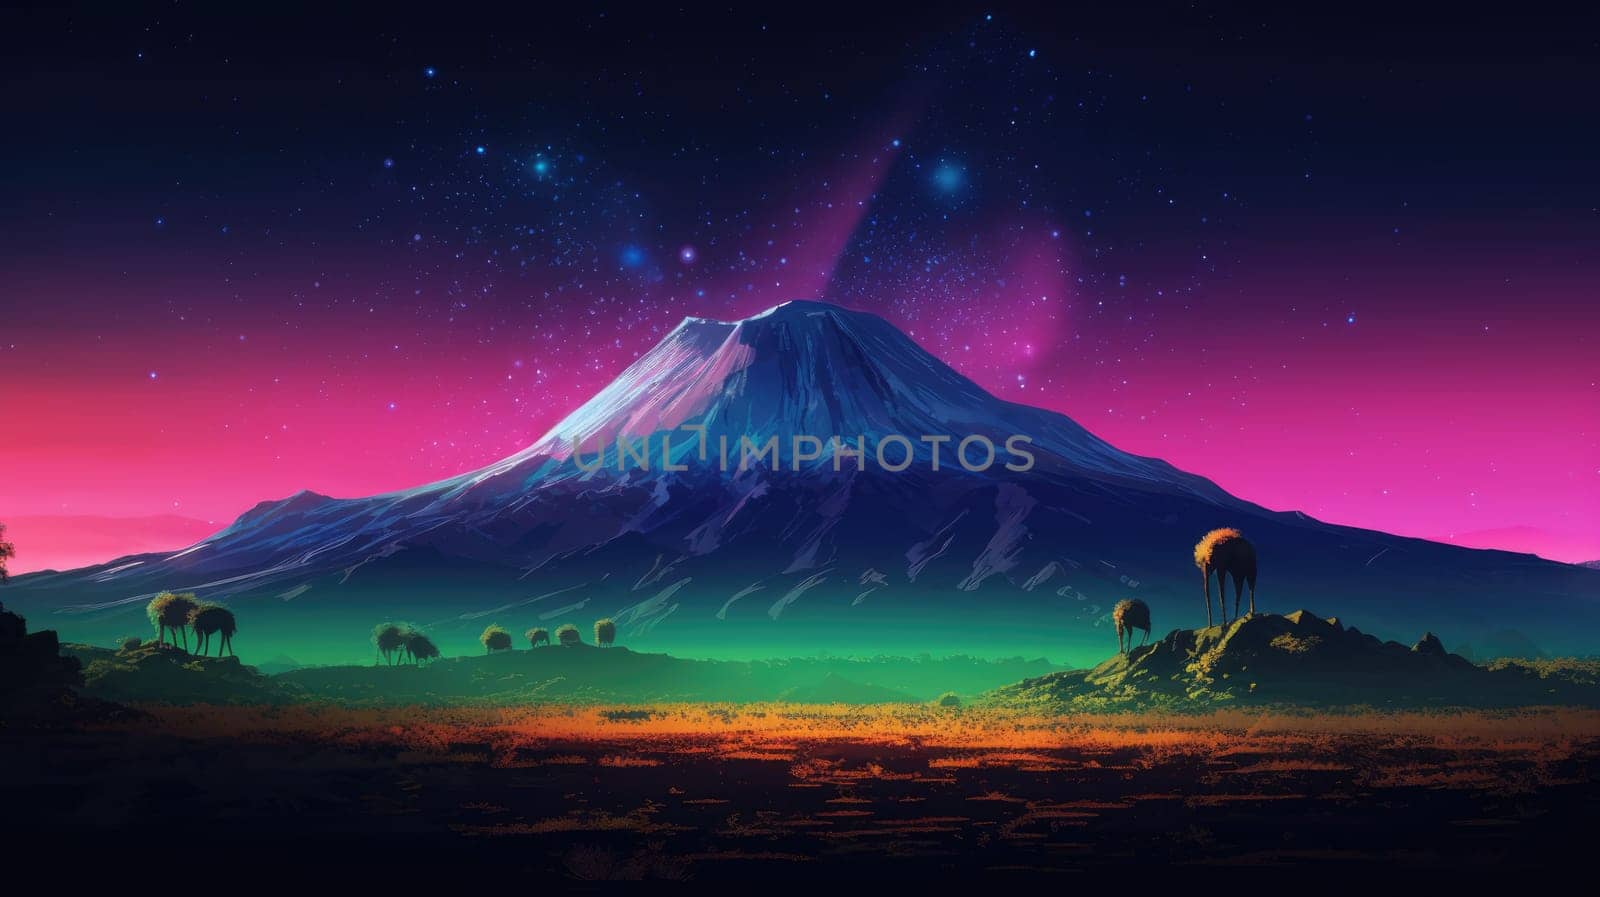 Enchanting Landscape of Fuji Mountain in Japan with Pink neon Sky and Snowy Peaks by JuliaDorian